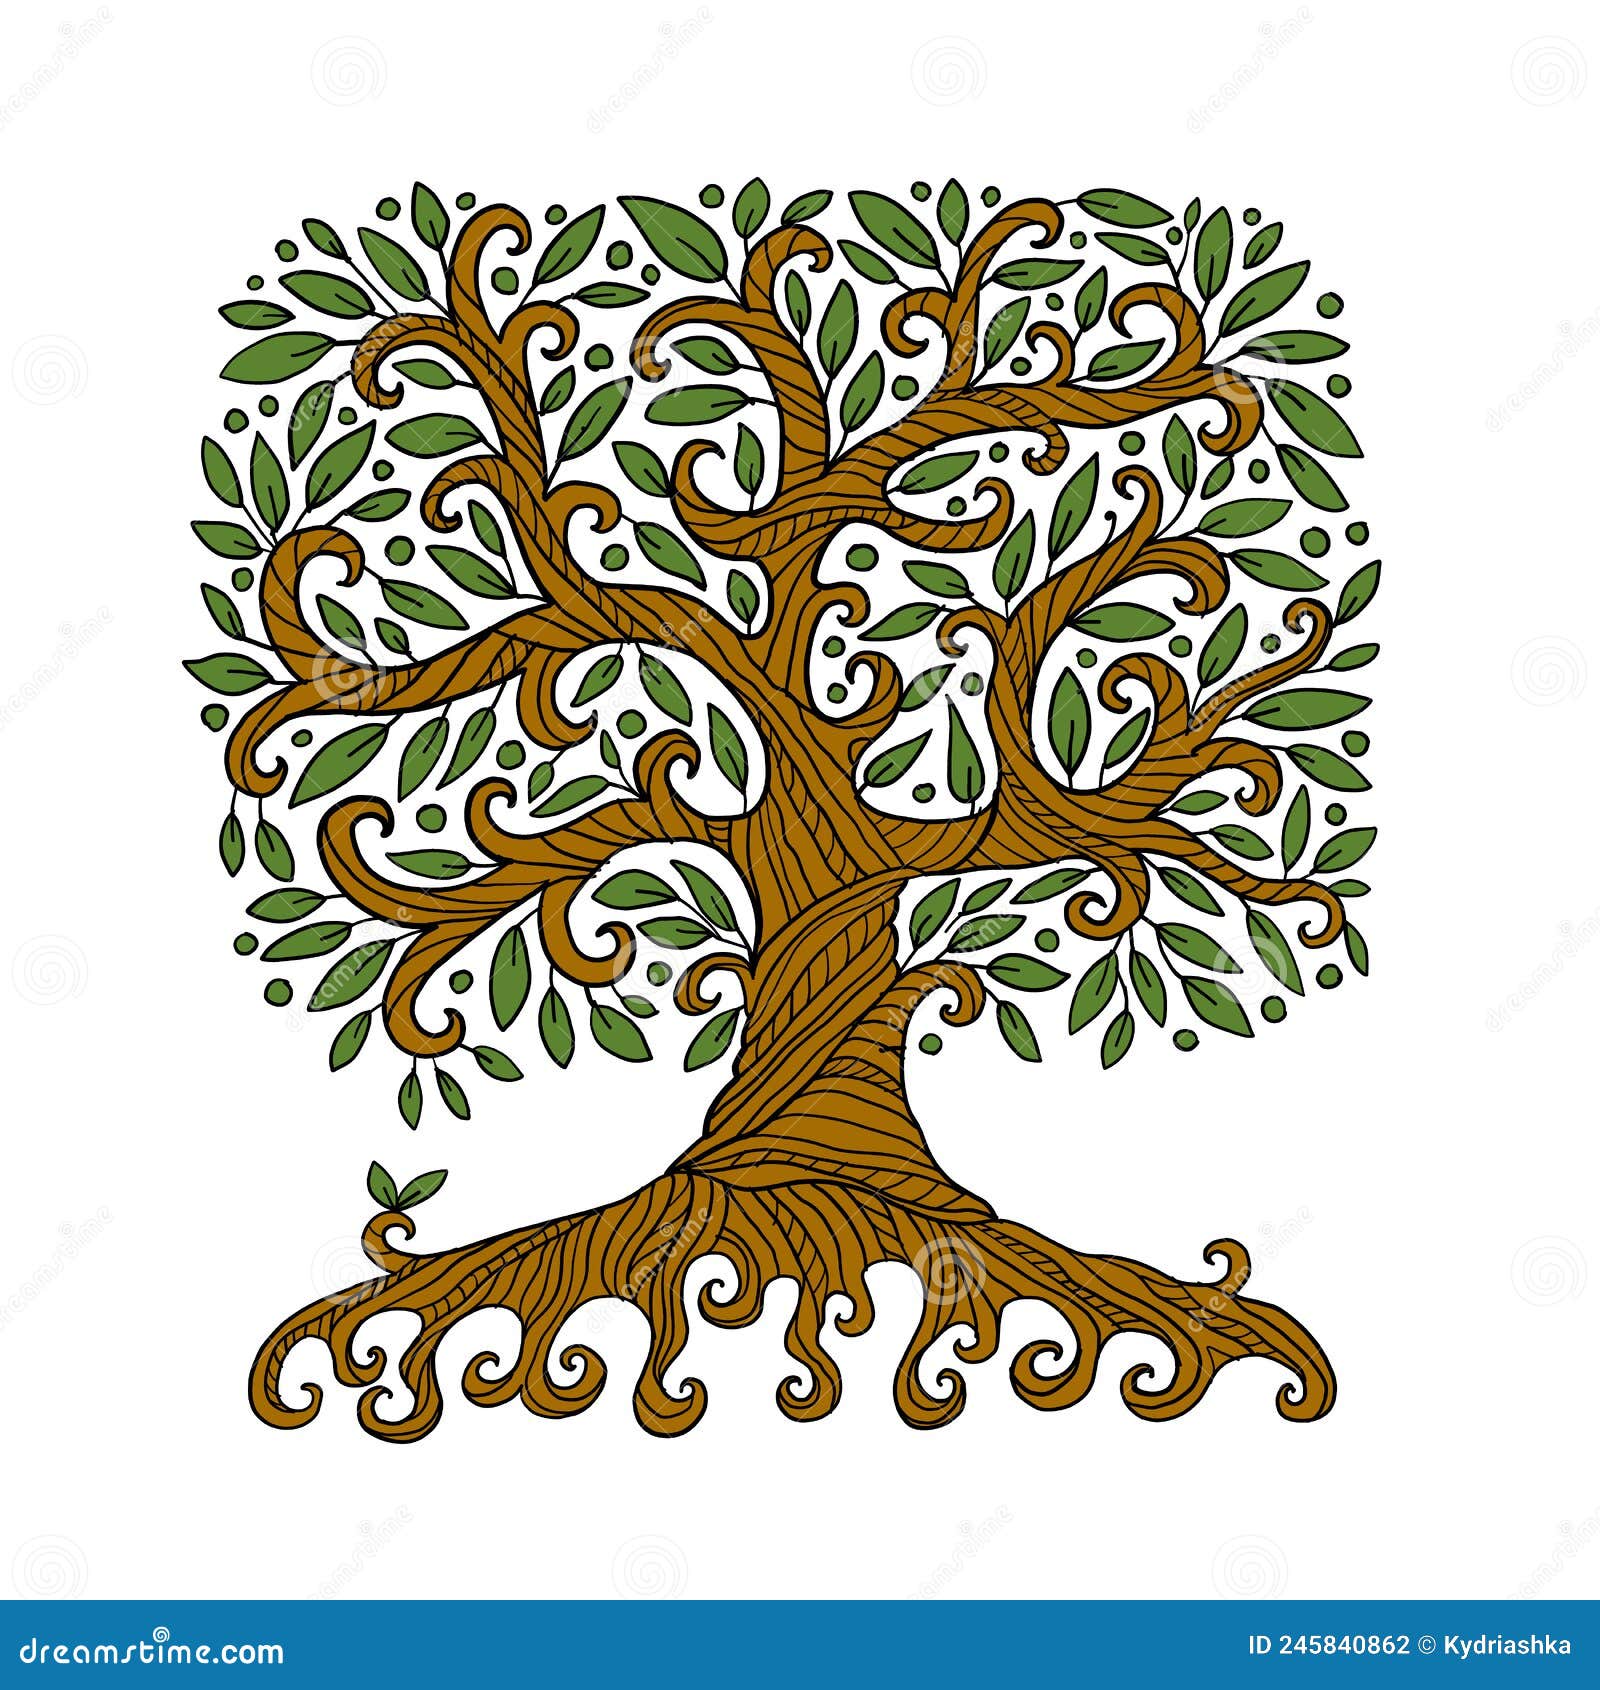 Abstract family tree stock vector. Illustration of brand - 48715480-saigonsouth.com.vn